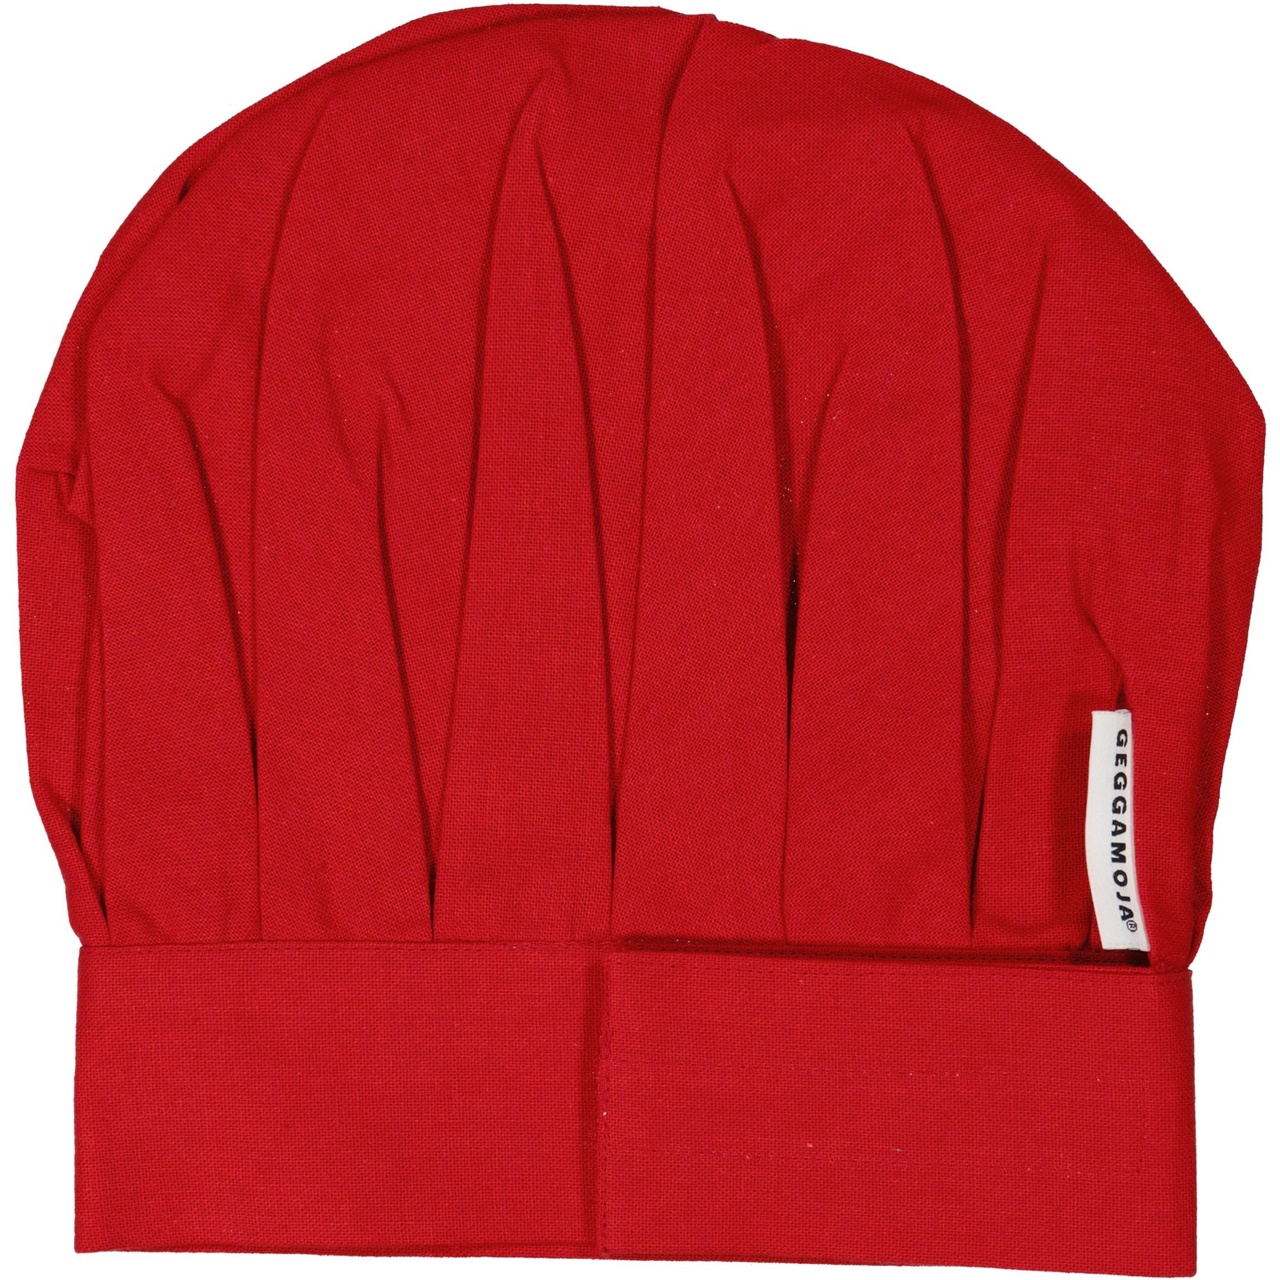 Apron Flounce Red